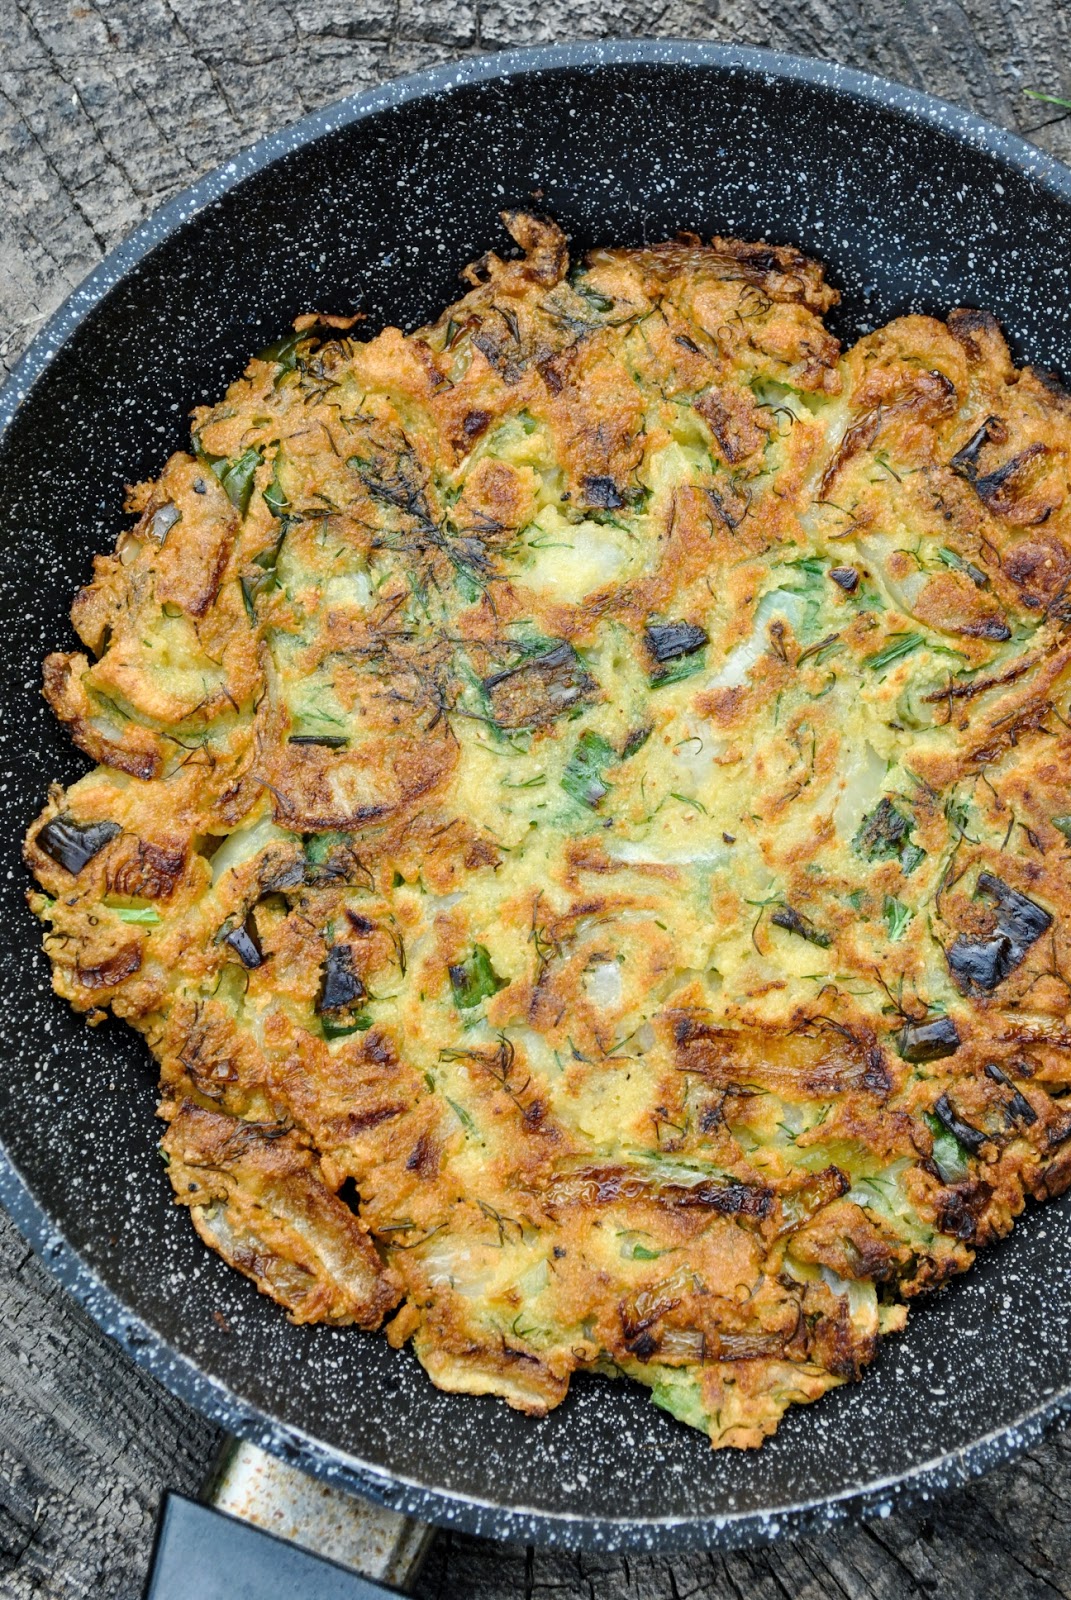 49 Savory Vegan Breakfast Recipes: Chickpea and Onion Omelette